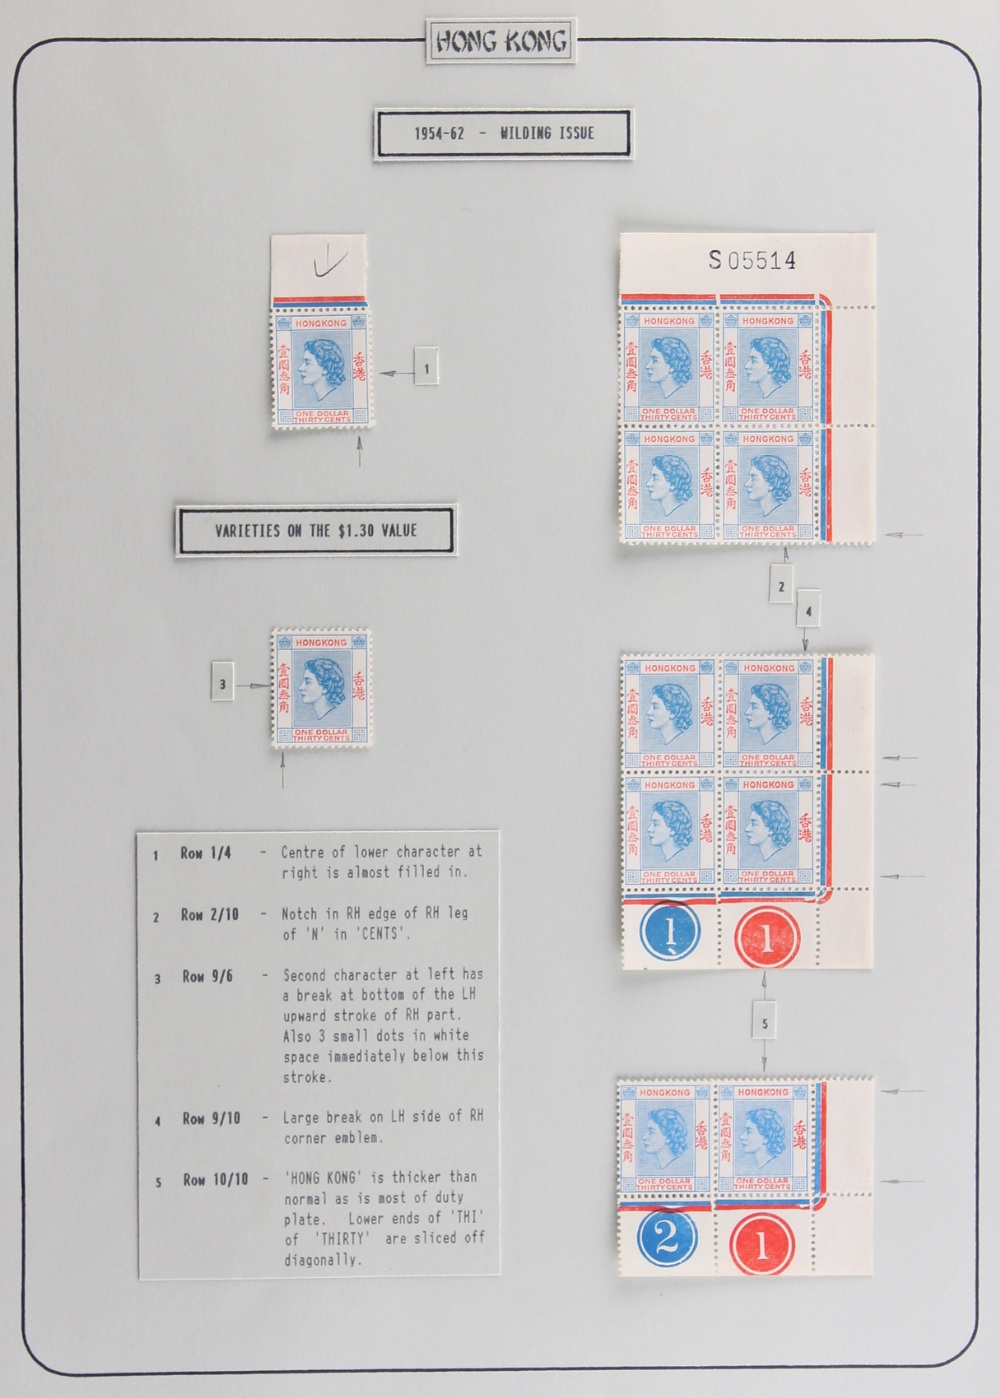 The Basil Lewis (1927-2019) collection of stamps - Hong Kong: 1954-62 $1.30 "short THI" (2) in a